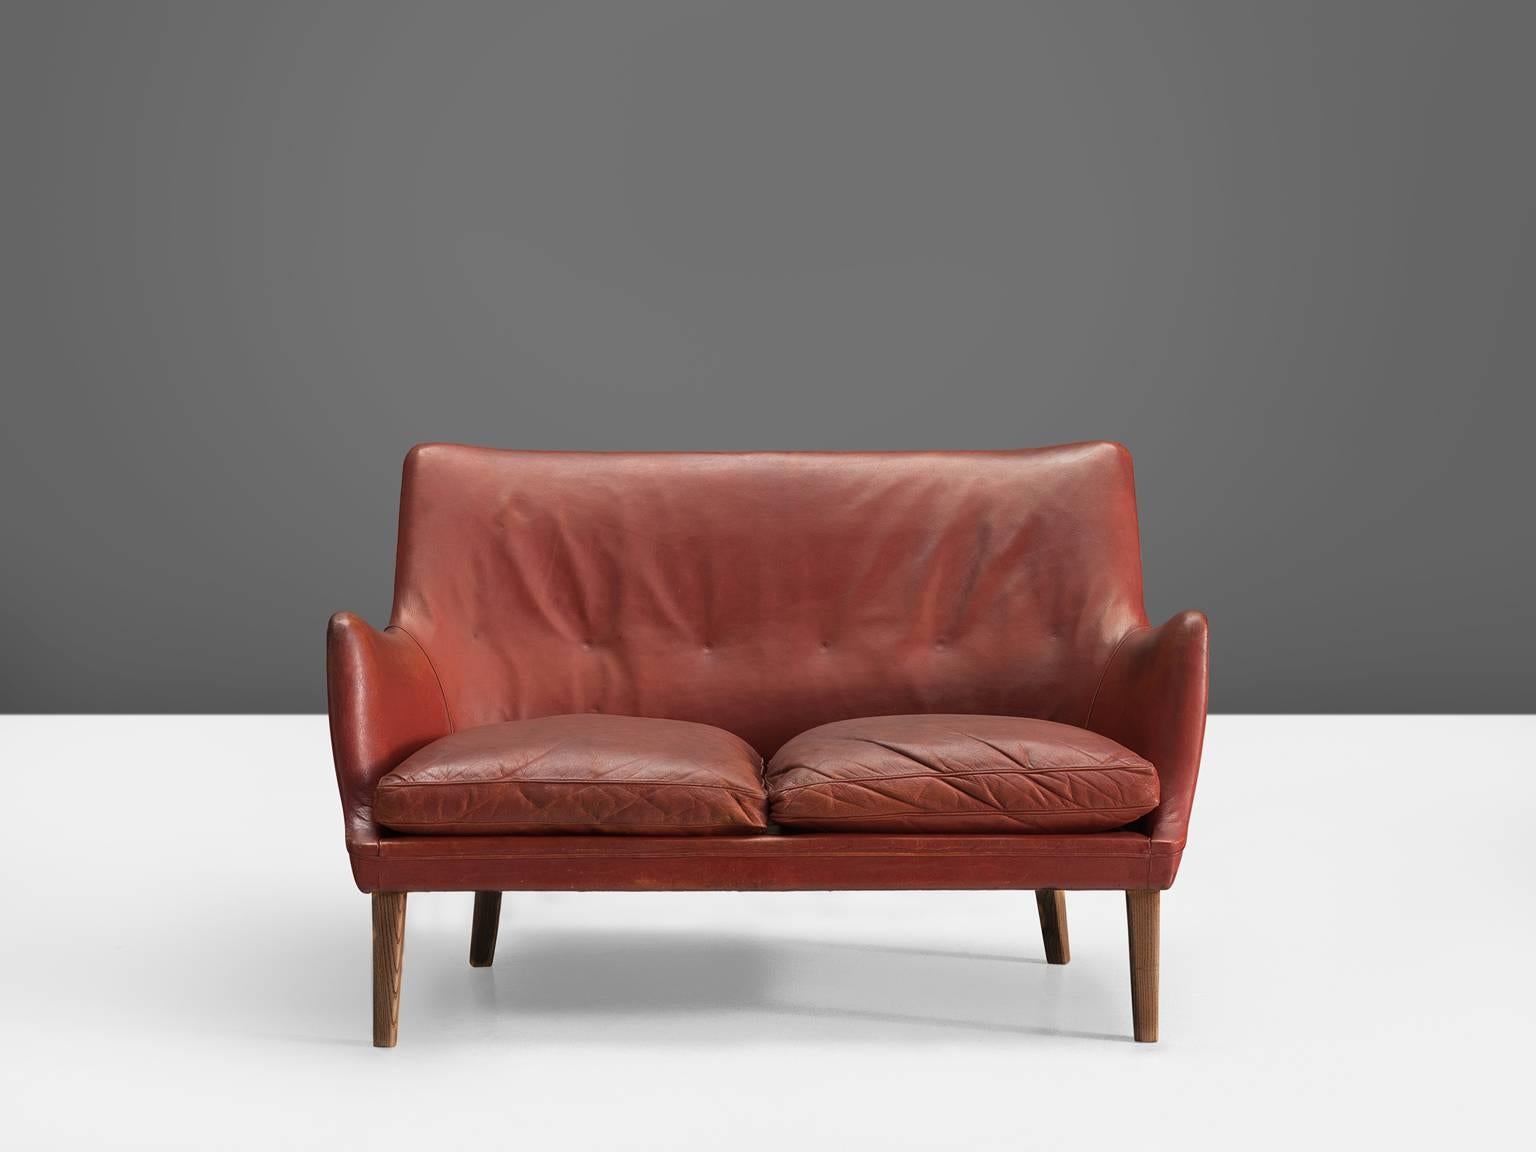 Arne Vodder for Ivan Schlechter, sofa, red leather and wood, Denmark, 1953.

Elegant two-seat sofa in red leather by Danish designer Arne Vodder. This sofa shows the great craftsmanship of Arne Vodder. The seating and back nice organic designs. The